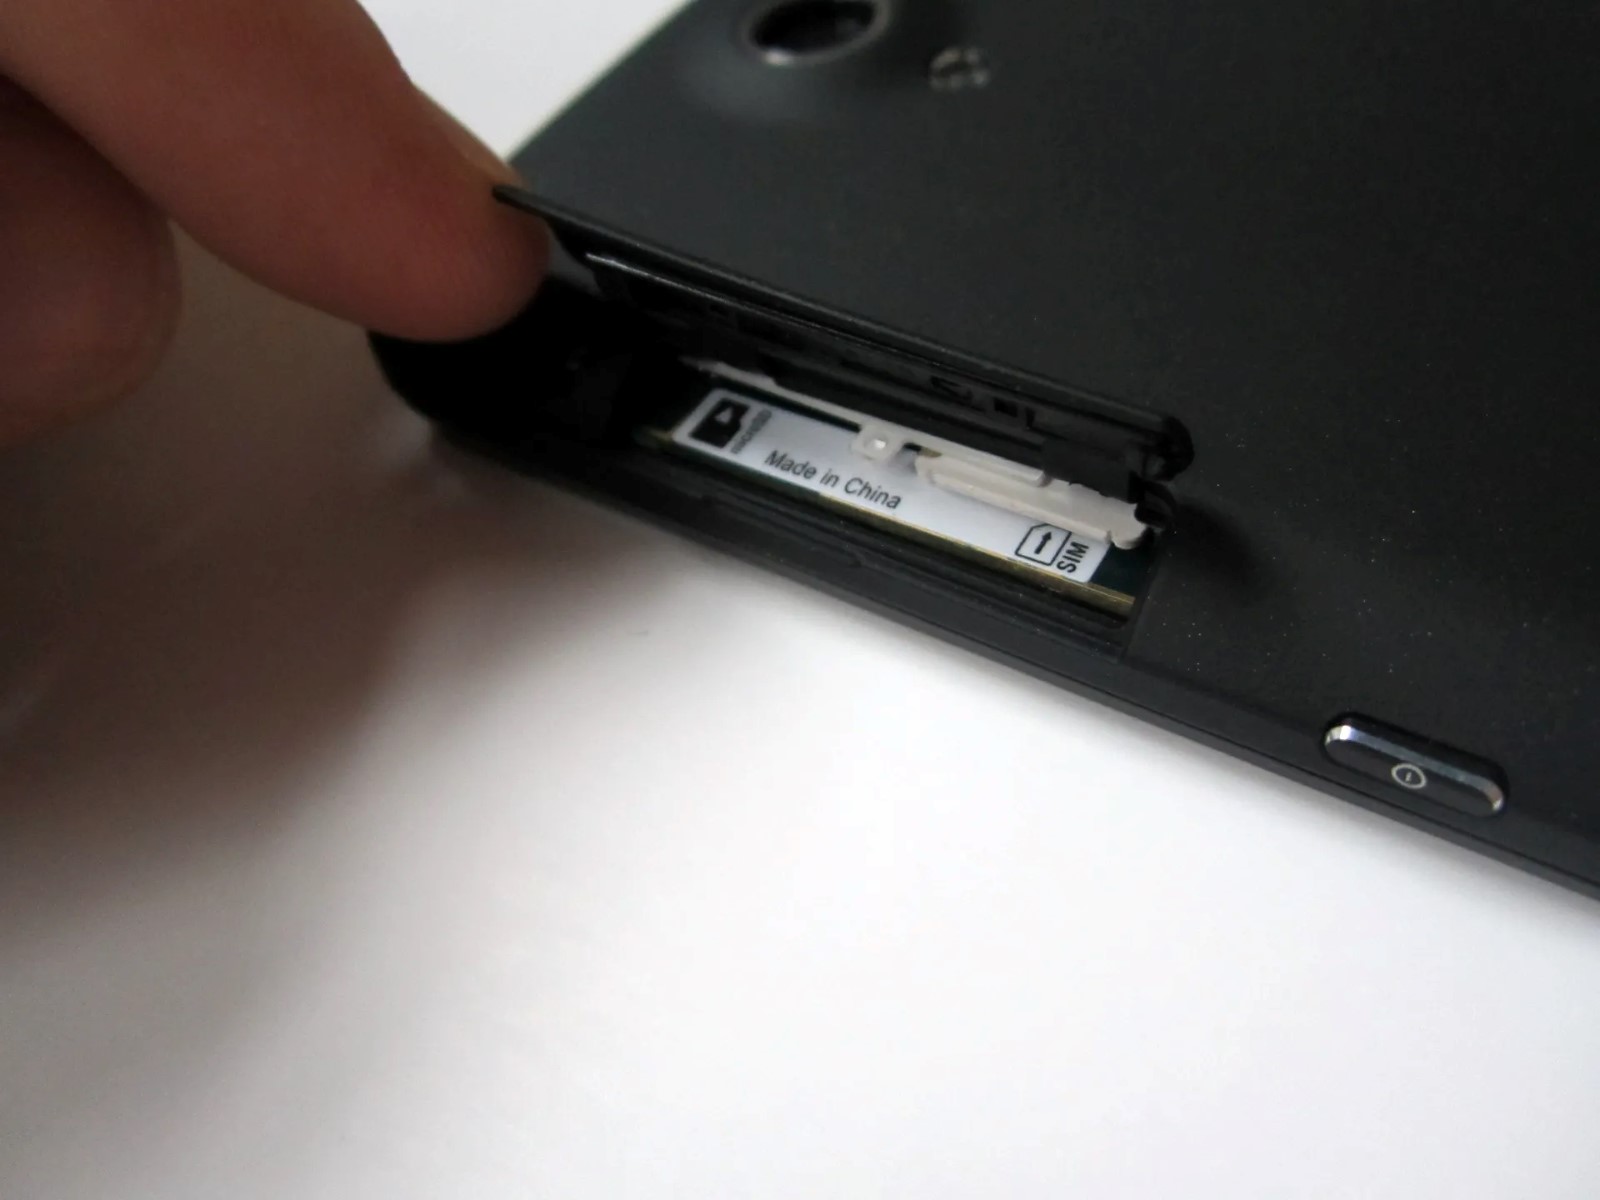 inserting-sim-card-in-sony-xperia-a-step-by-step-guide